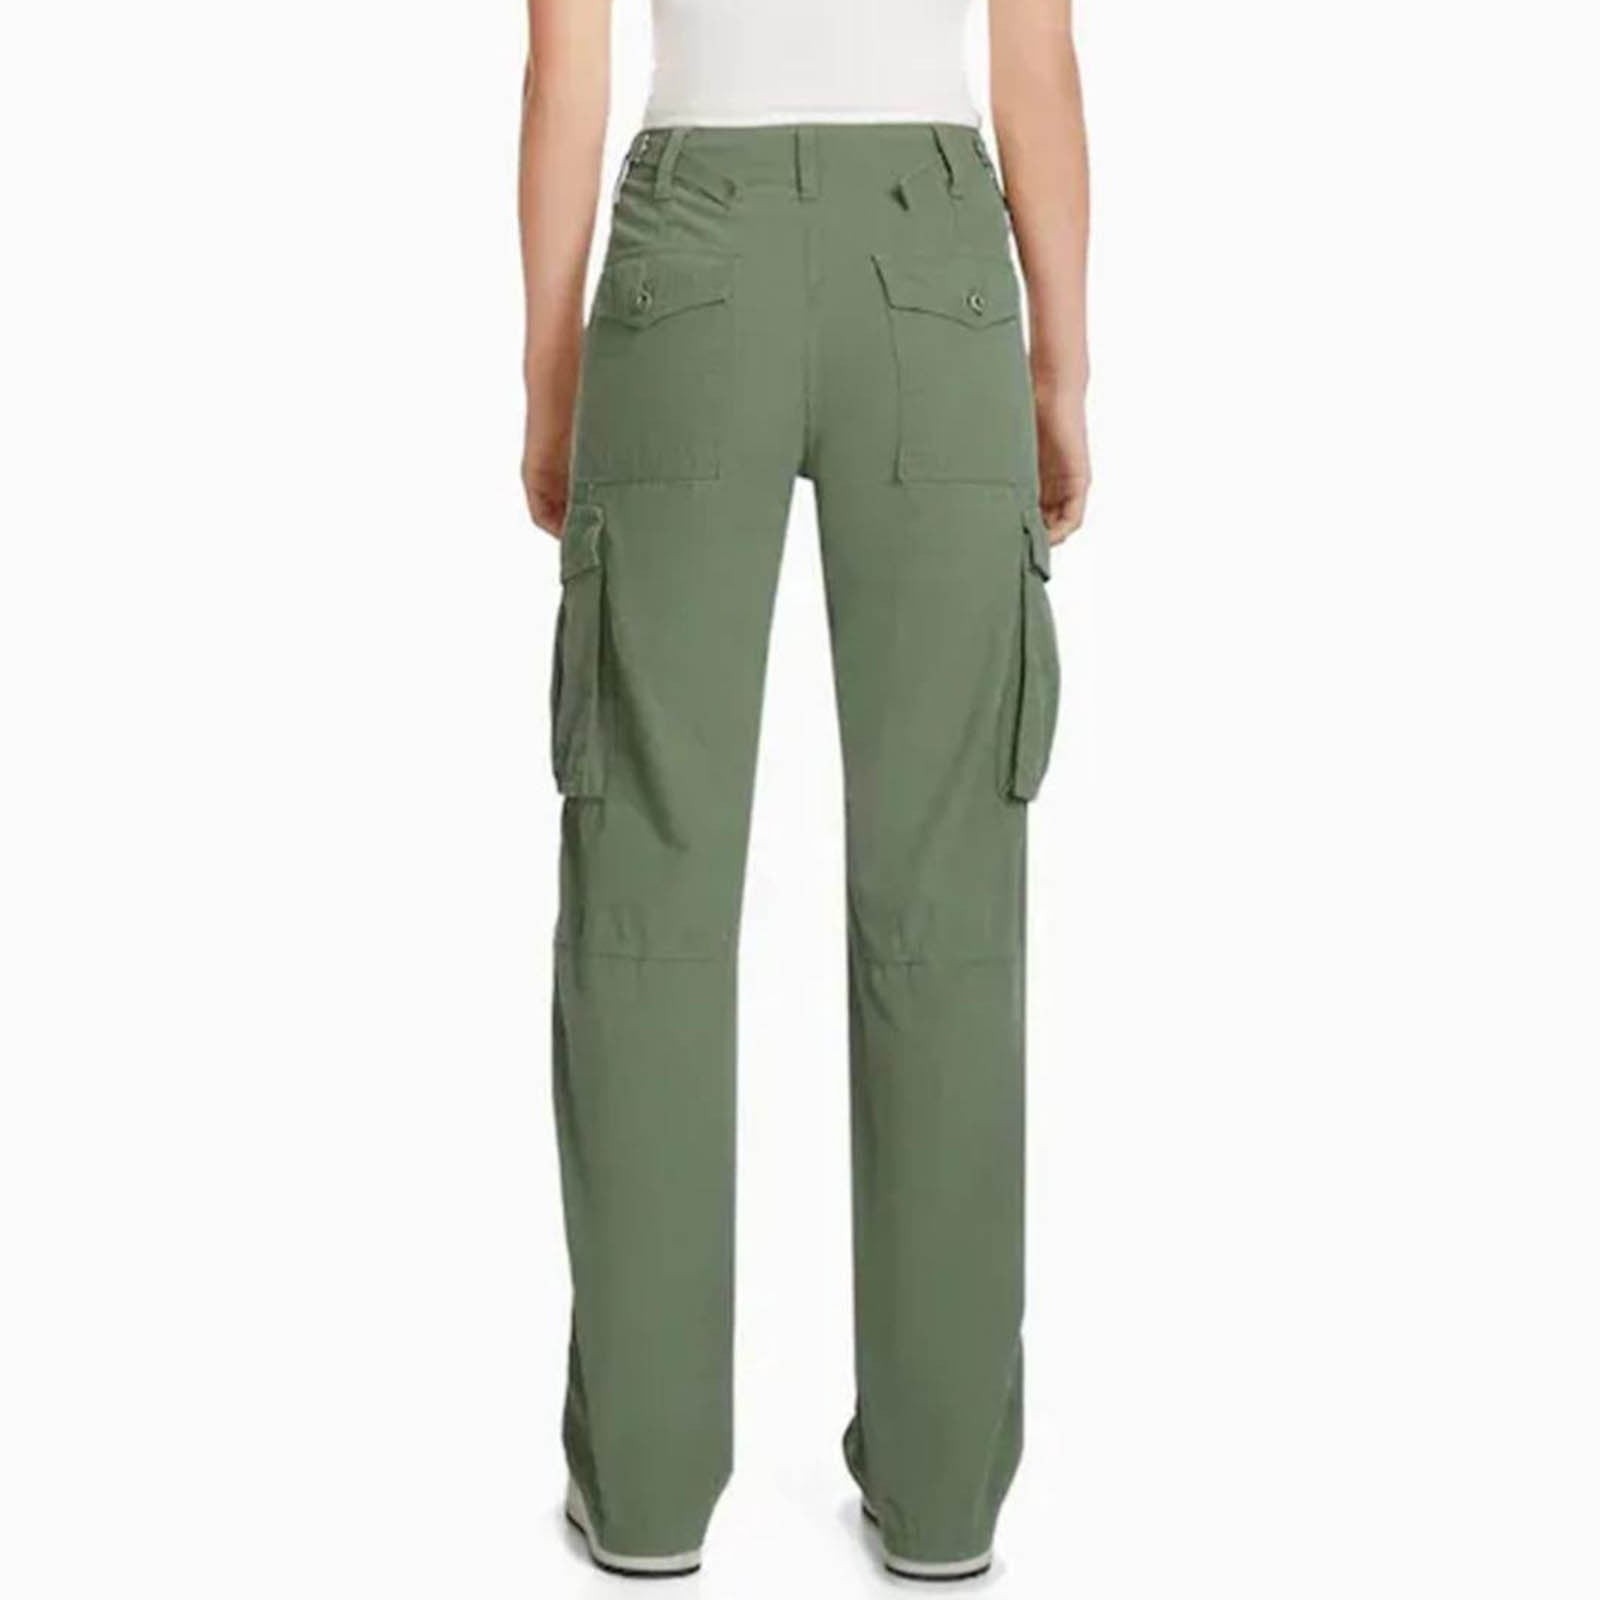 5 Ways To Style Baggy Green Cargo Pants Now - The Mom Edit